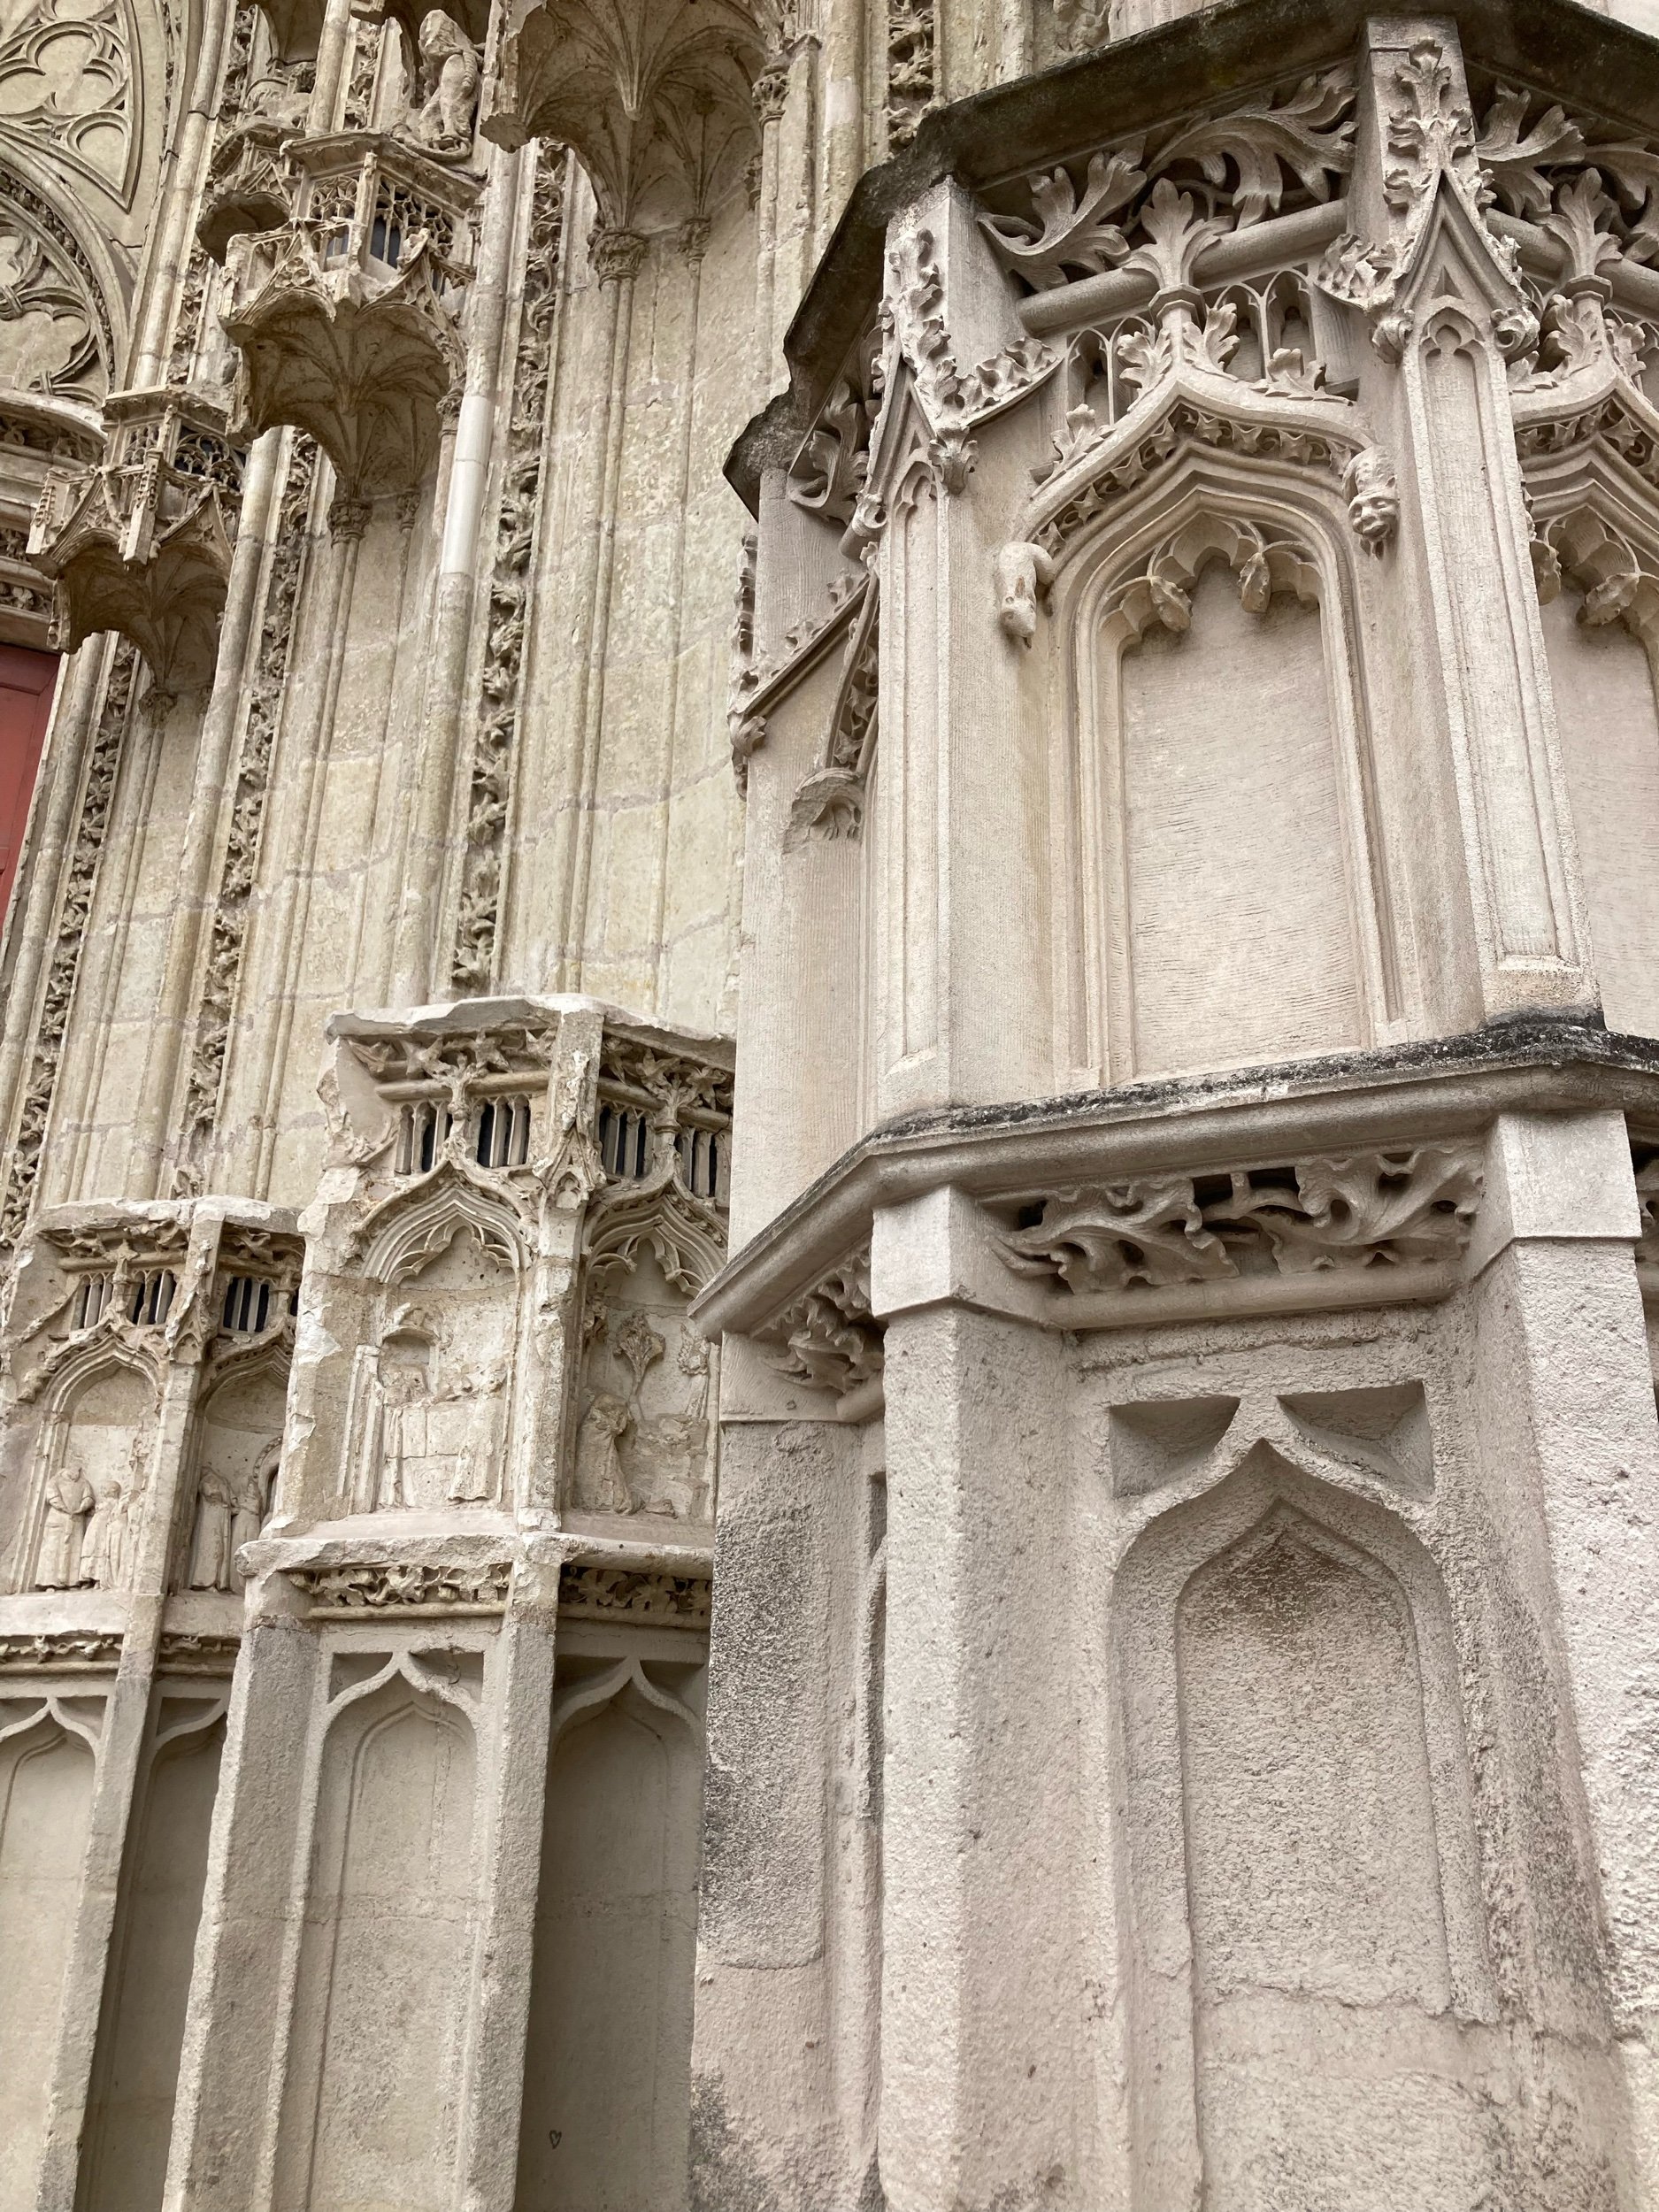 Exterior detailing on the facade of the cathedral.